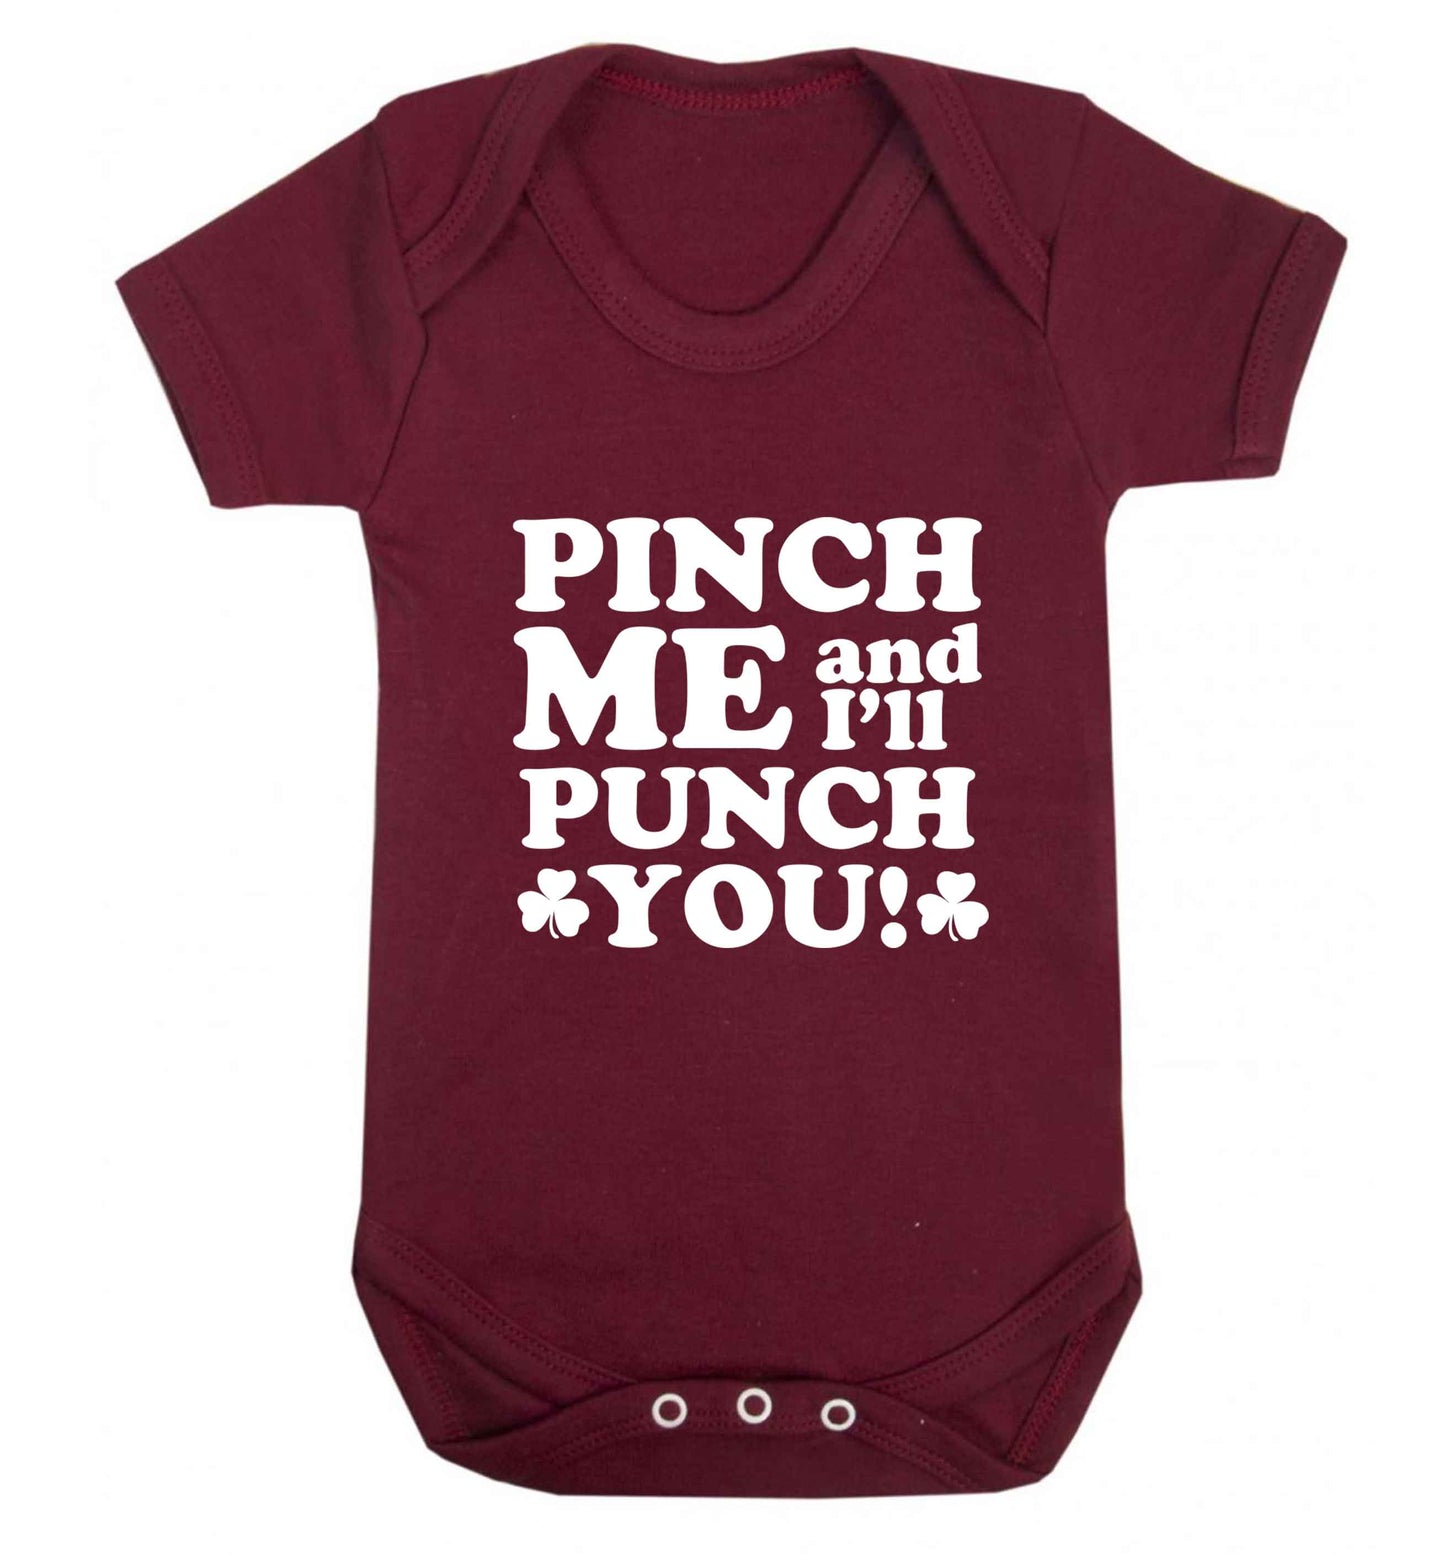 Pinch me and I'll punch you baby vest maroon 18-24 months